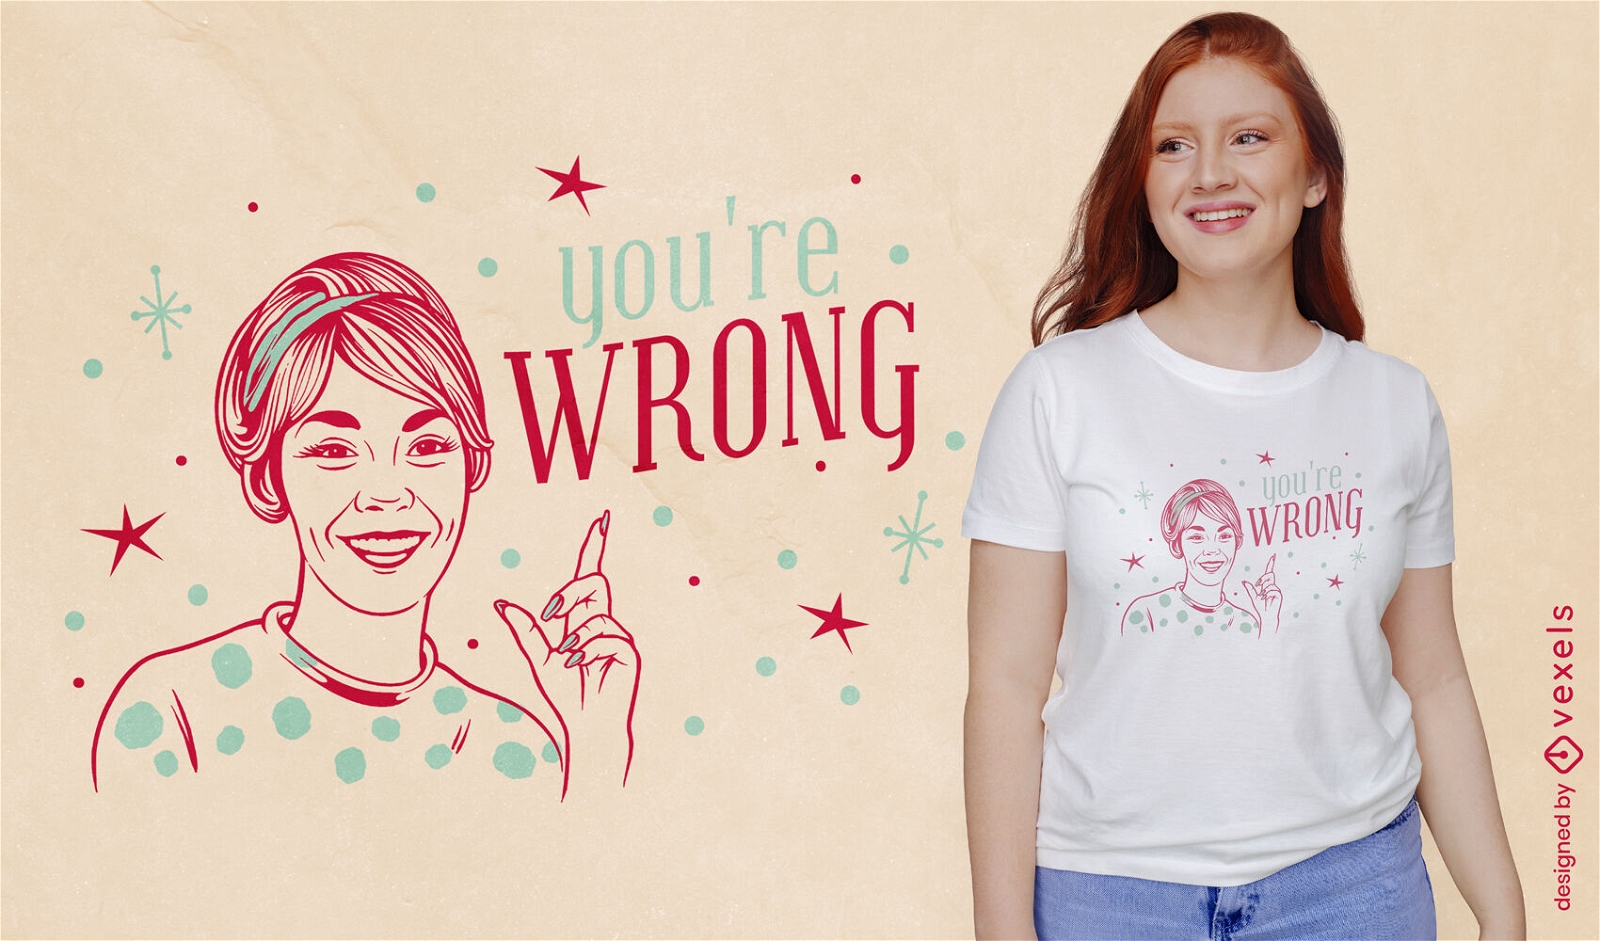 You're wrong vintage woman t-shirt design